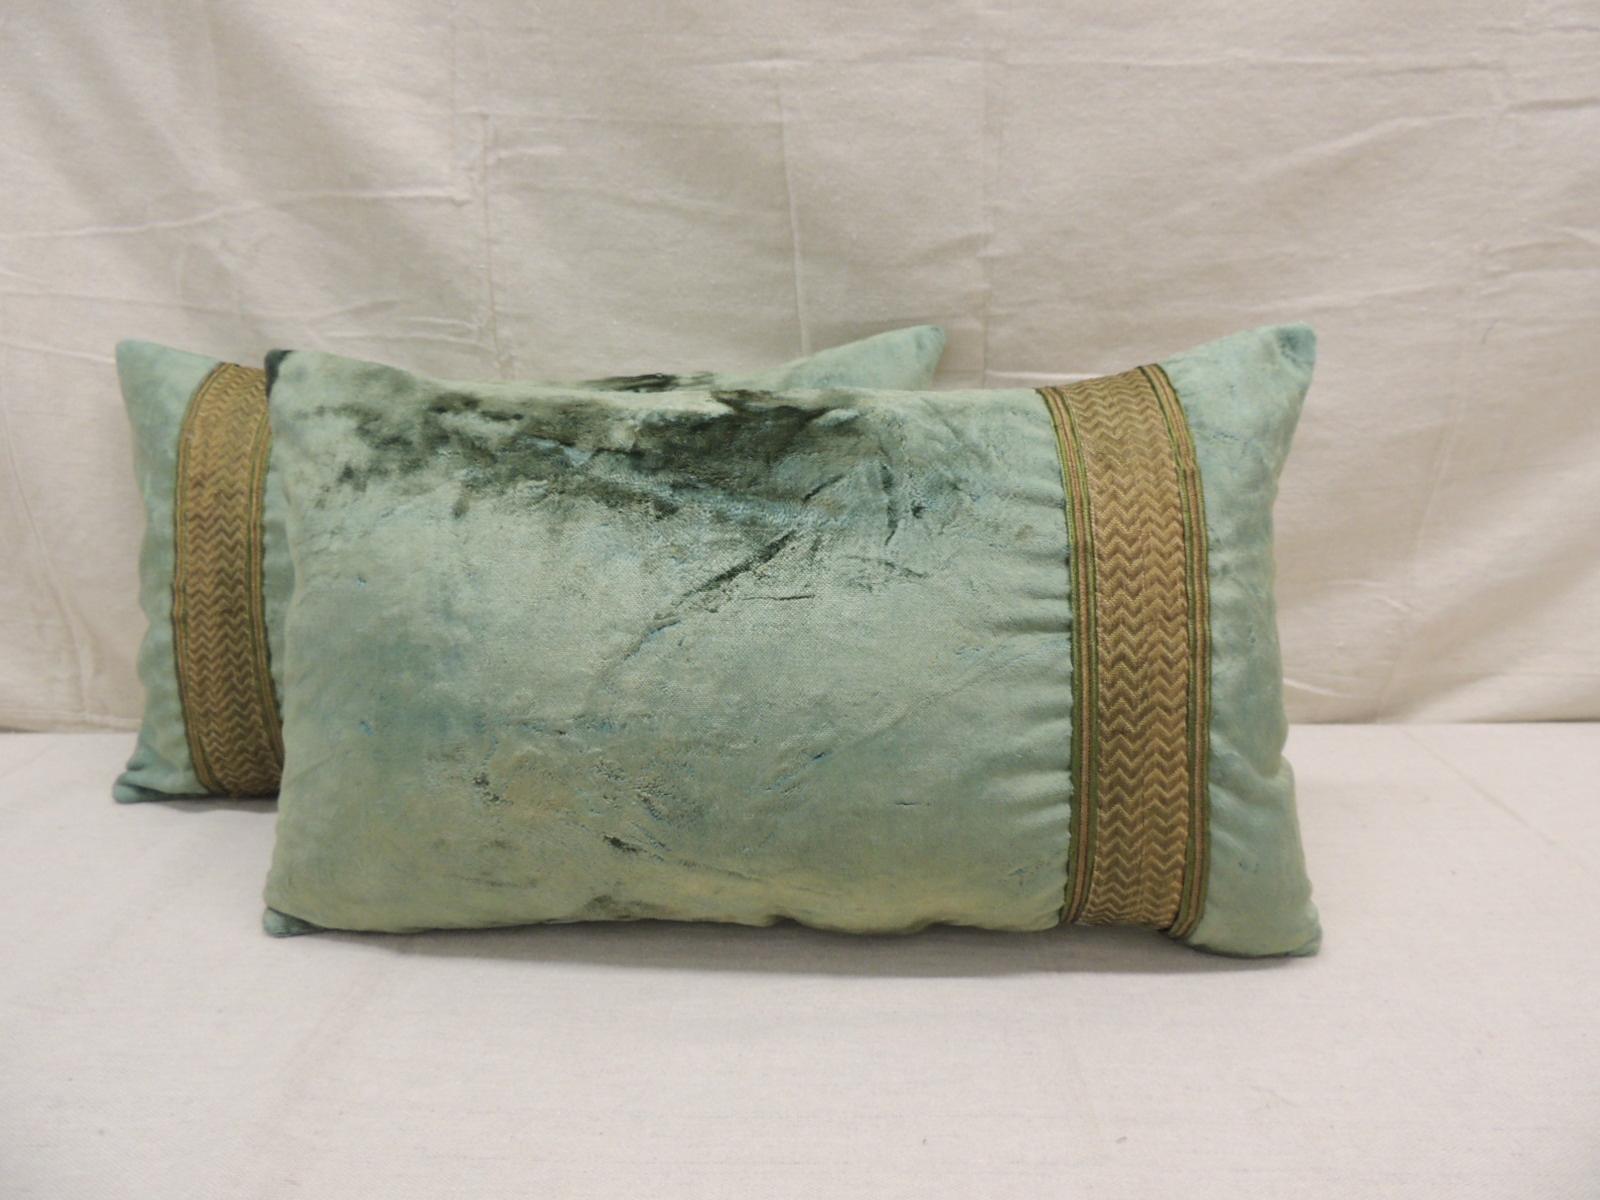 Hand-Crafted Pair of Antique Crushed Velvet Green and Gold Lumbar Decorative Pillows